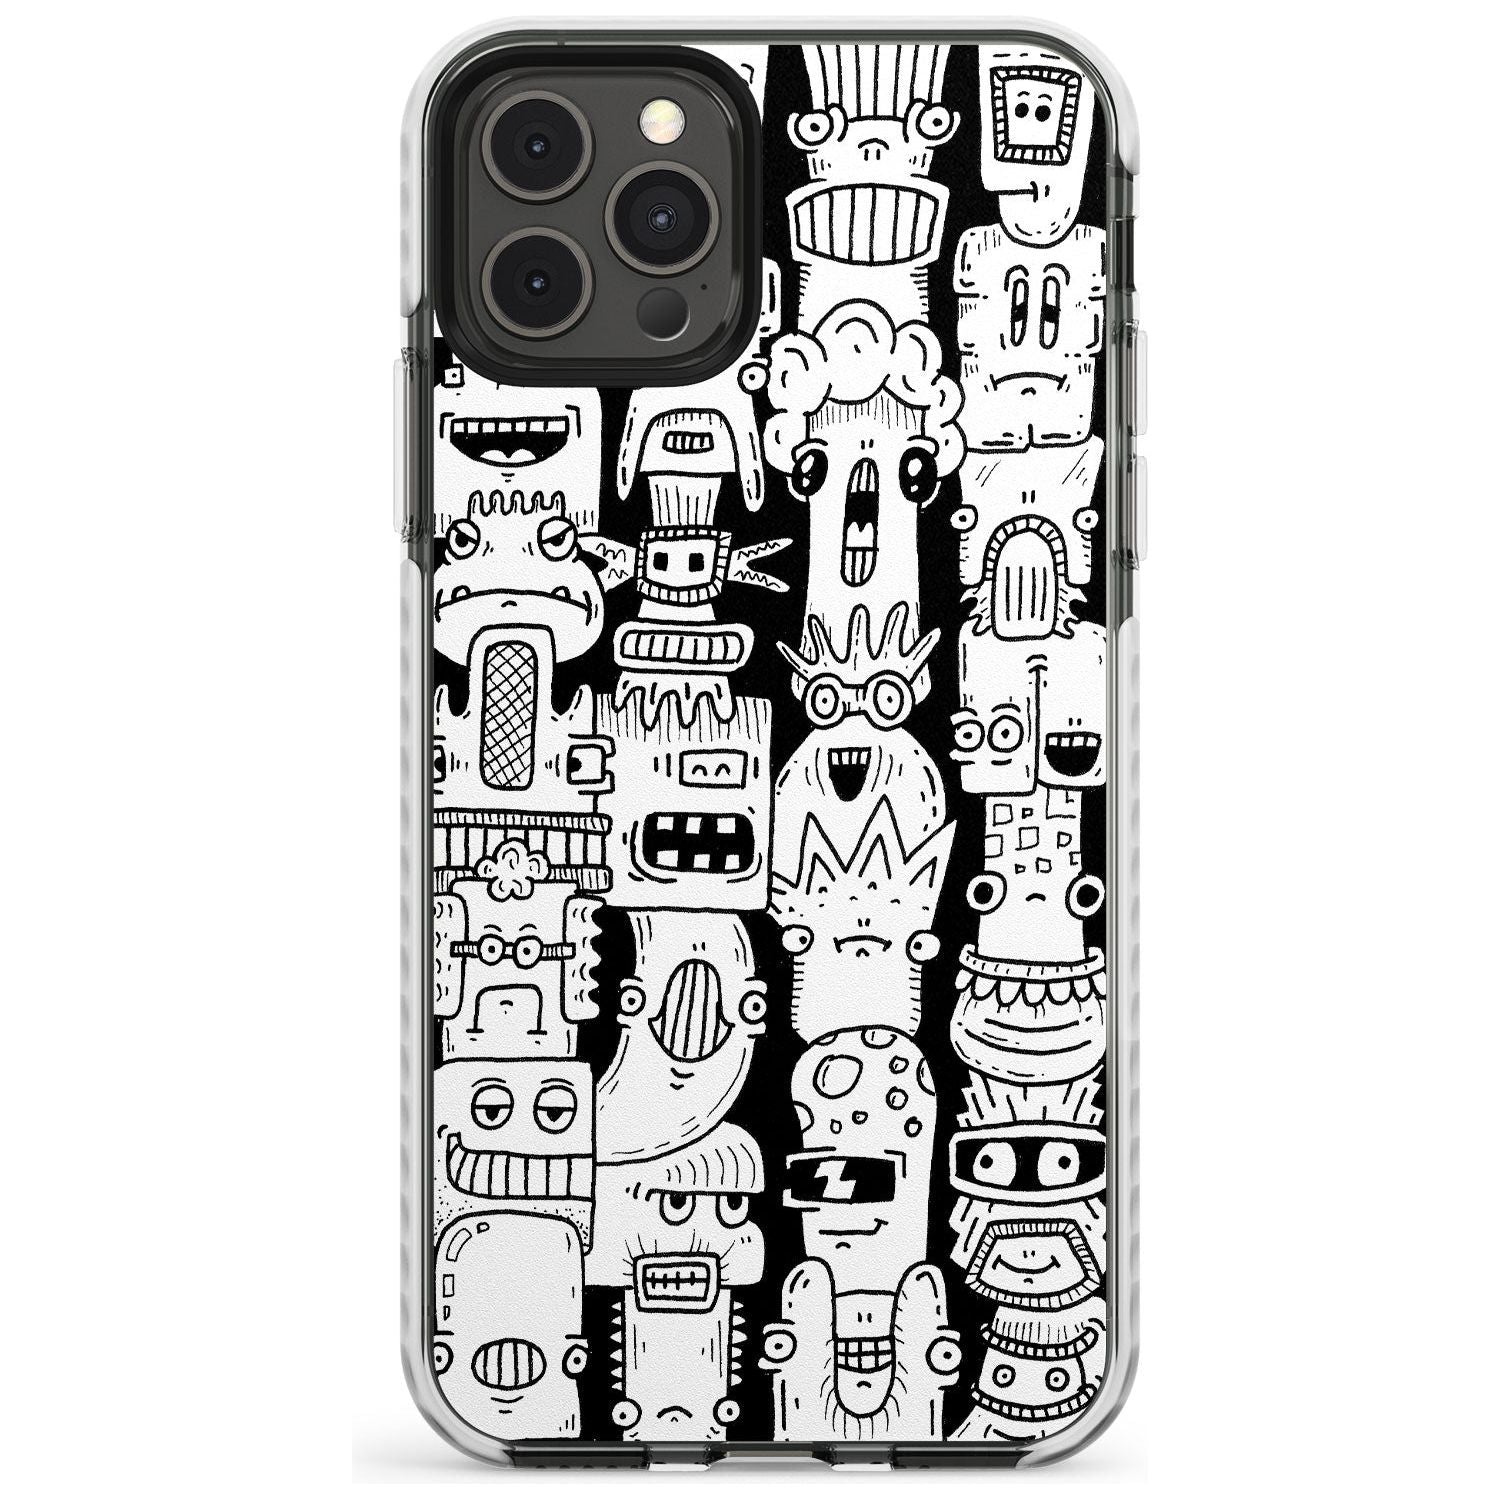 Monochrome Heads Impact Phone Case for iPhone 11 Pro Max